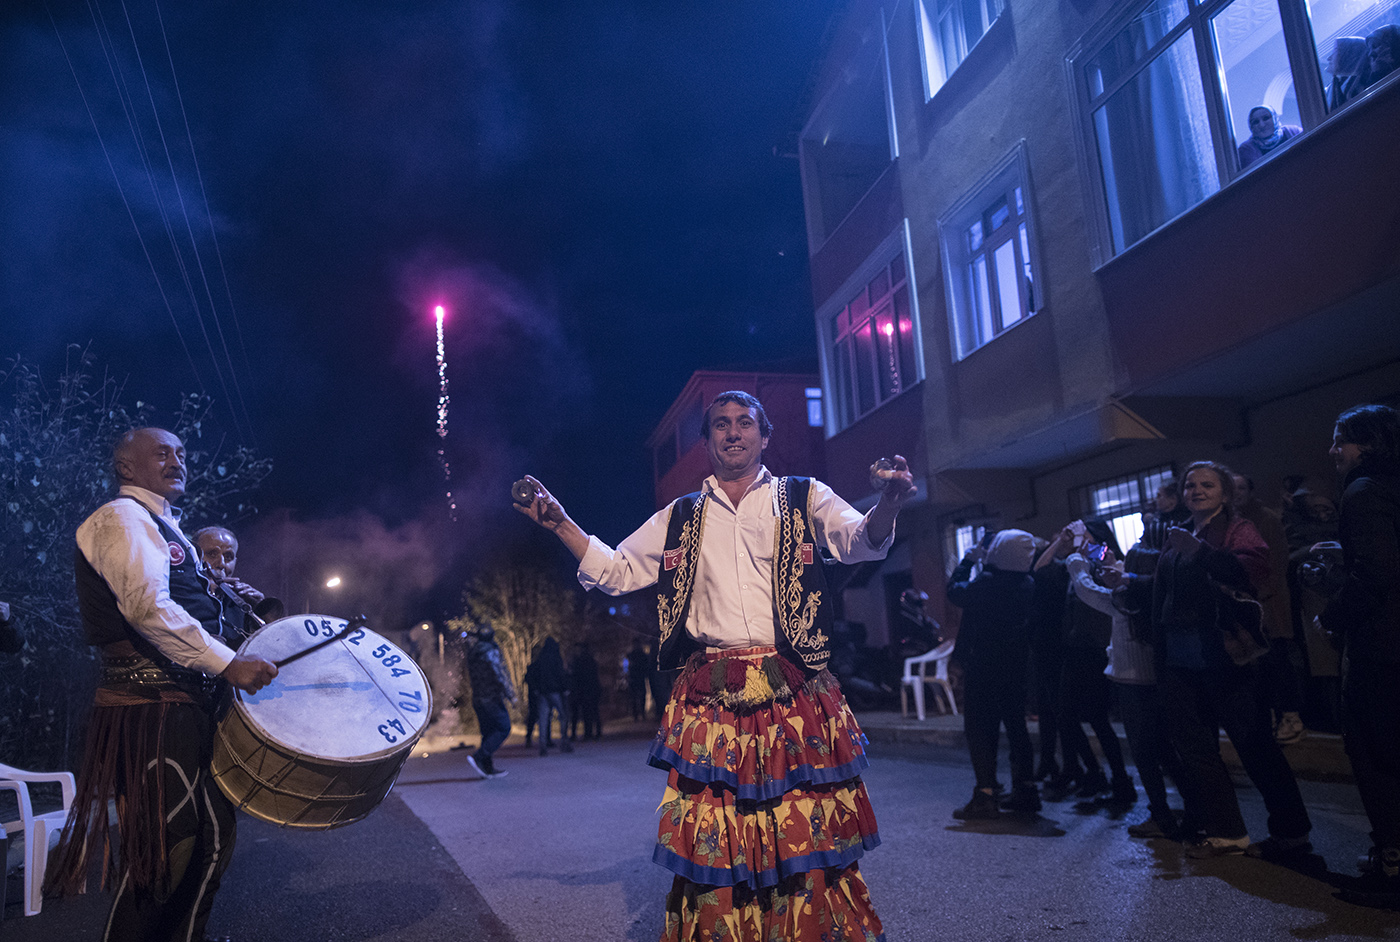 Osman Celik (C) dance while firework seen on background during a entertainment of a boy which will do soon compulsory military service in Istanbul, Turkey, 01 December 2019. 